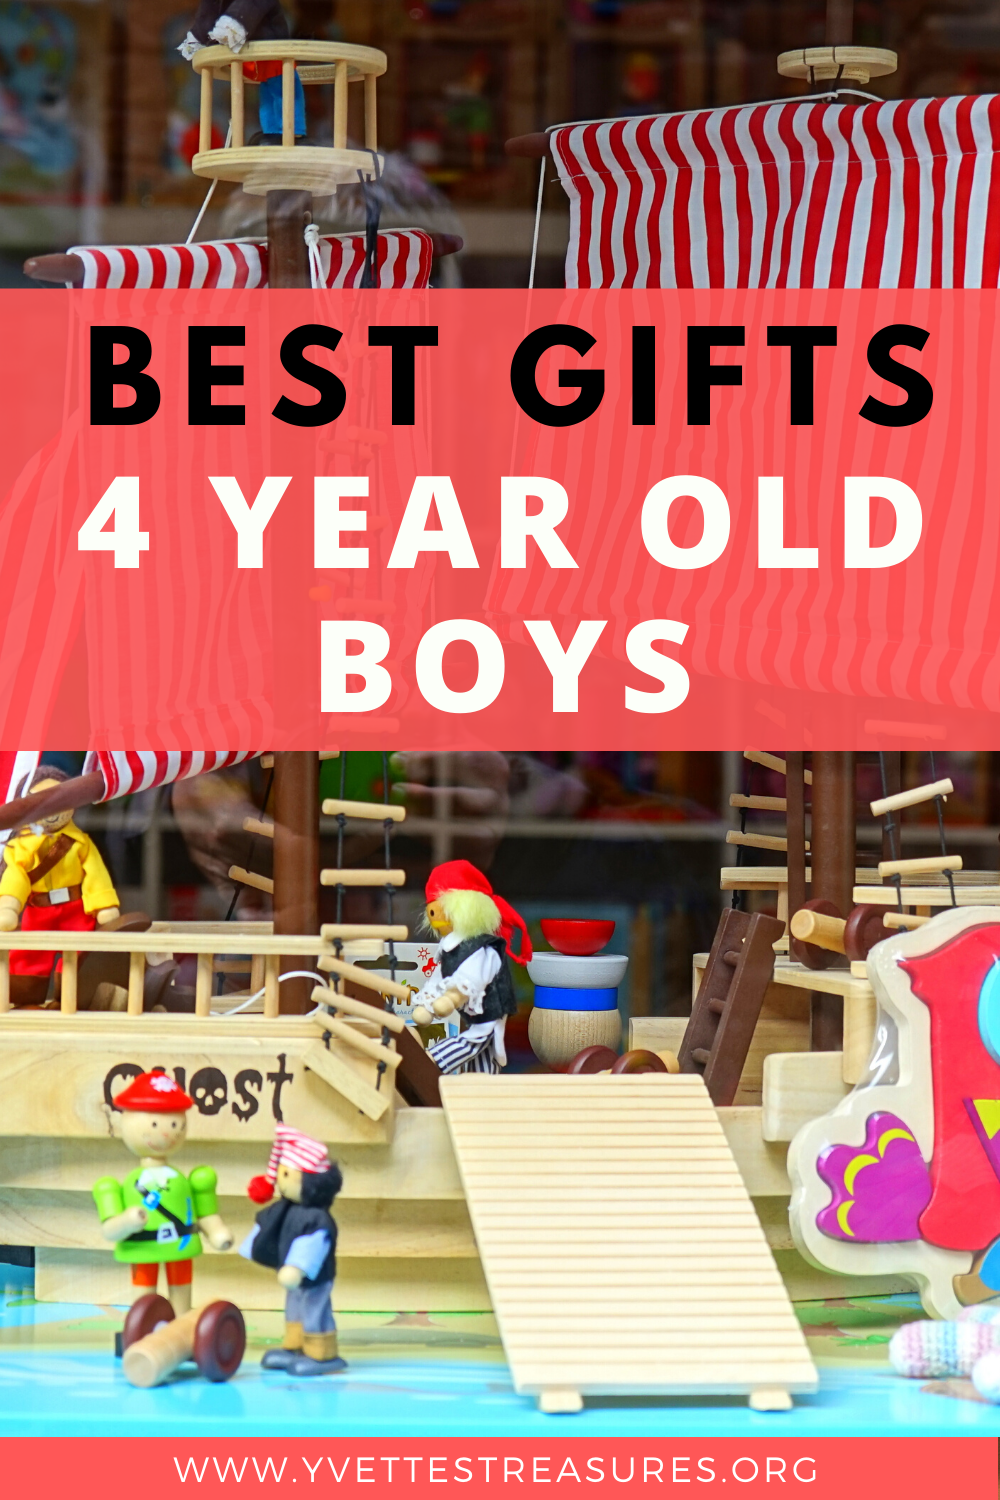 40 Best Birthday Gift Ideas For 4 Year Old Boys in 2020